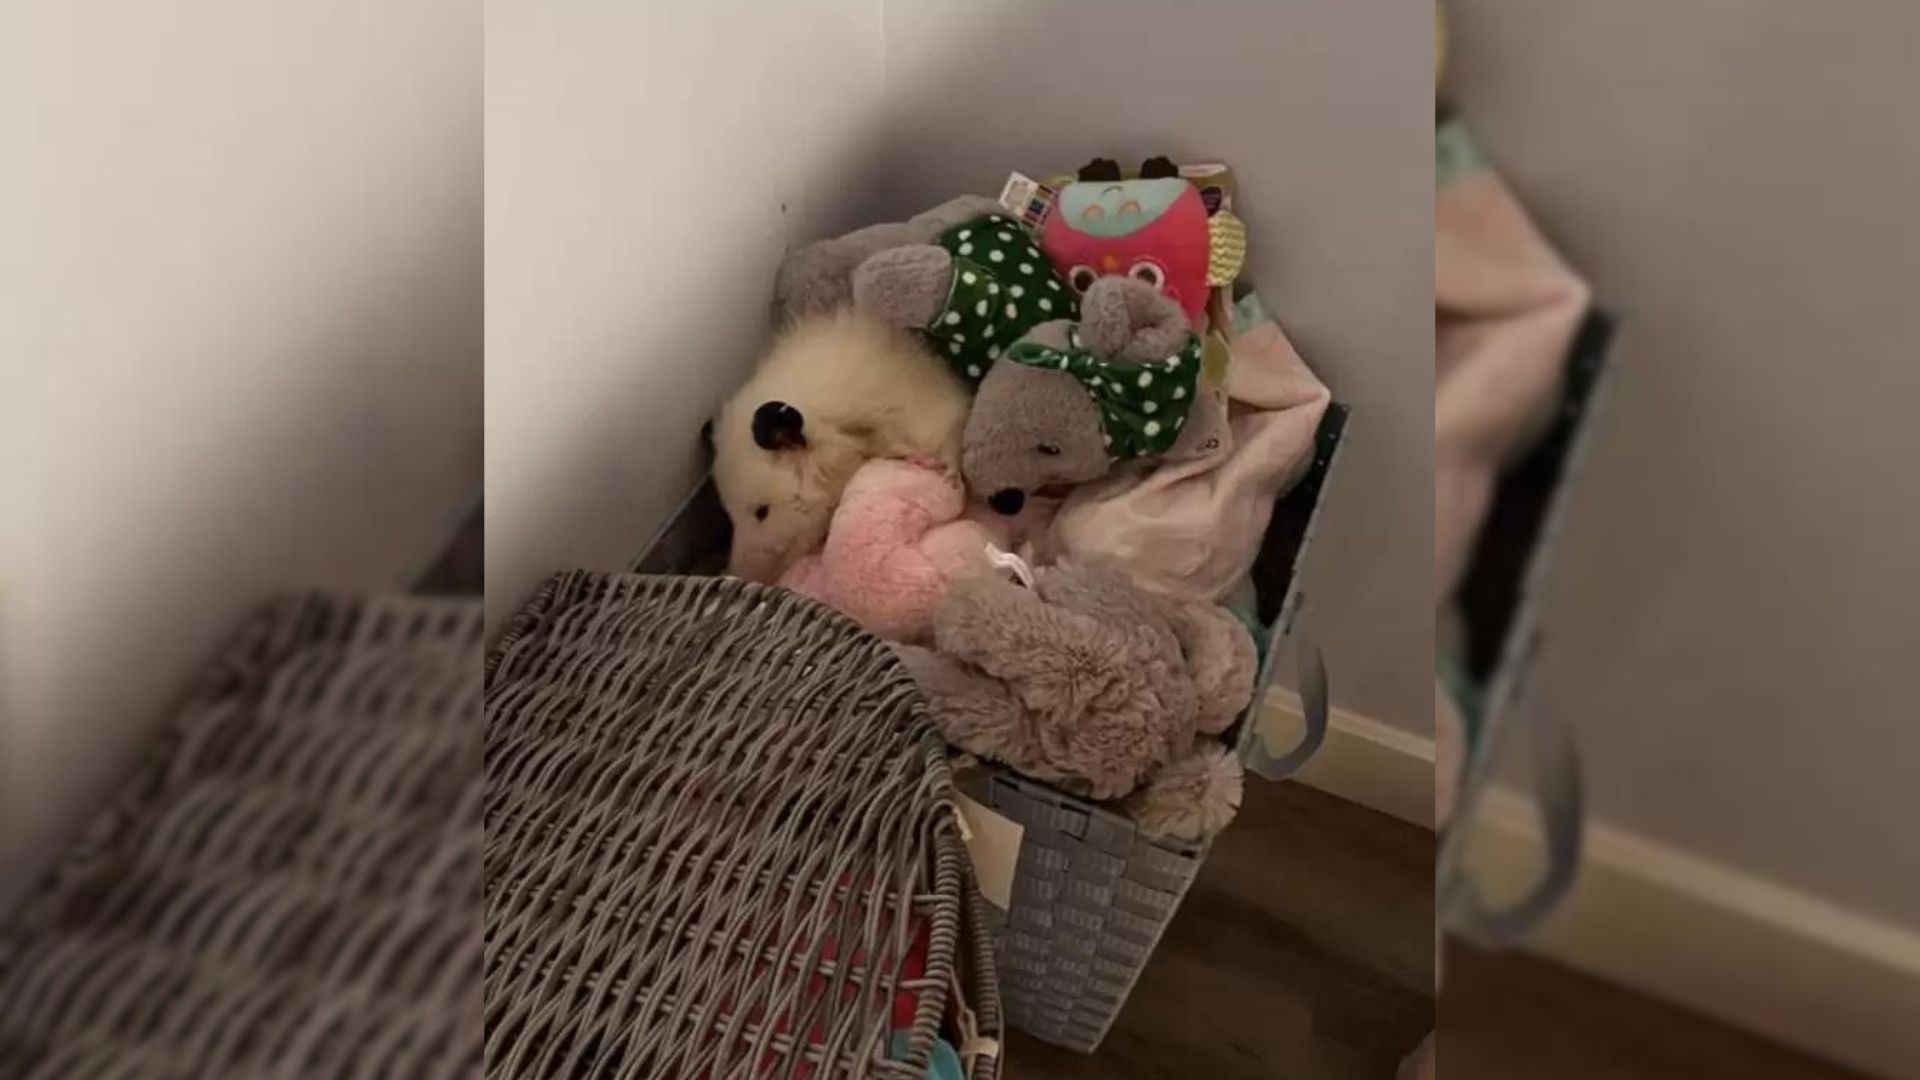 Woman Noticed A Stuffed Animal Moving And Was Shocked When She Realized What Was There